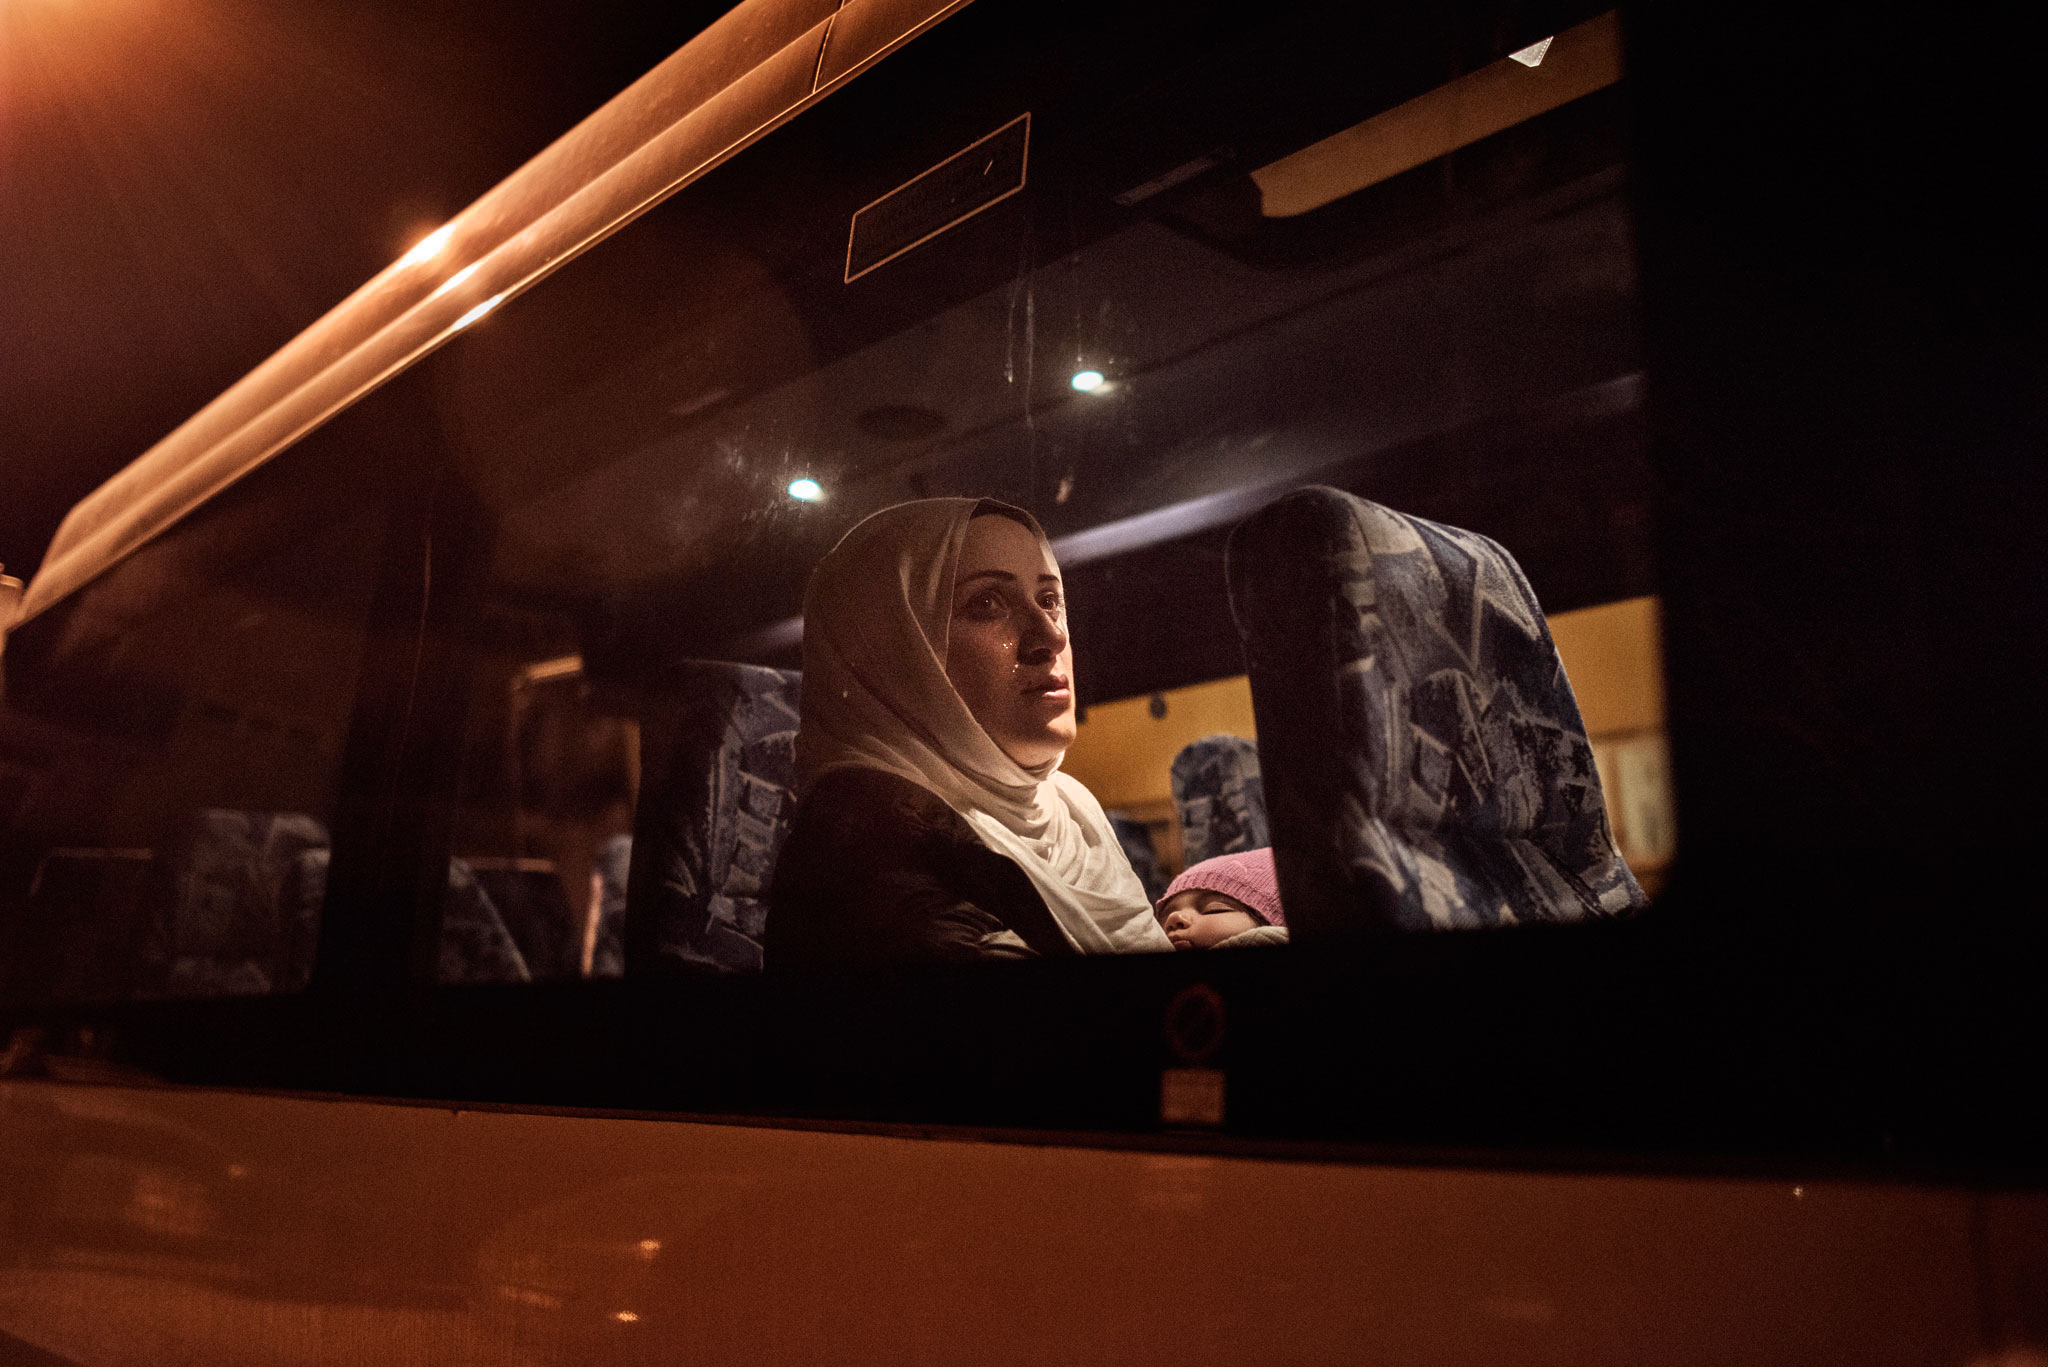 Syrian refugee Taimaa Abazlii weeps as she sits on the bus in front of her new apartment after a long, grueling day of travel and unheaval once again from Athens to their new home in Polva, Estonia, April 20, 2017.  The family, along with Muhannad's brother's family of Mufeed and Iyman Ateek and their two children, were relocated to a small village of 6000 people in the middle of the forest, called Polva; they feared it would be impossible to integrate and make a life in such a remote place.  After over one year of traveling from war-town Syria, making their way from Turkey to Greece, waiting in greece for asylum, the family is finally relocating to Estonia.